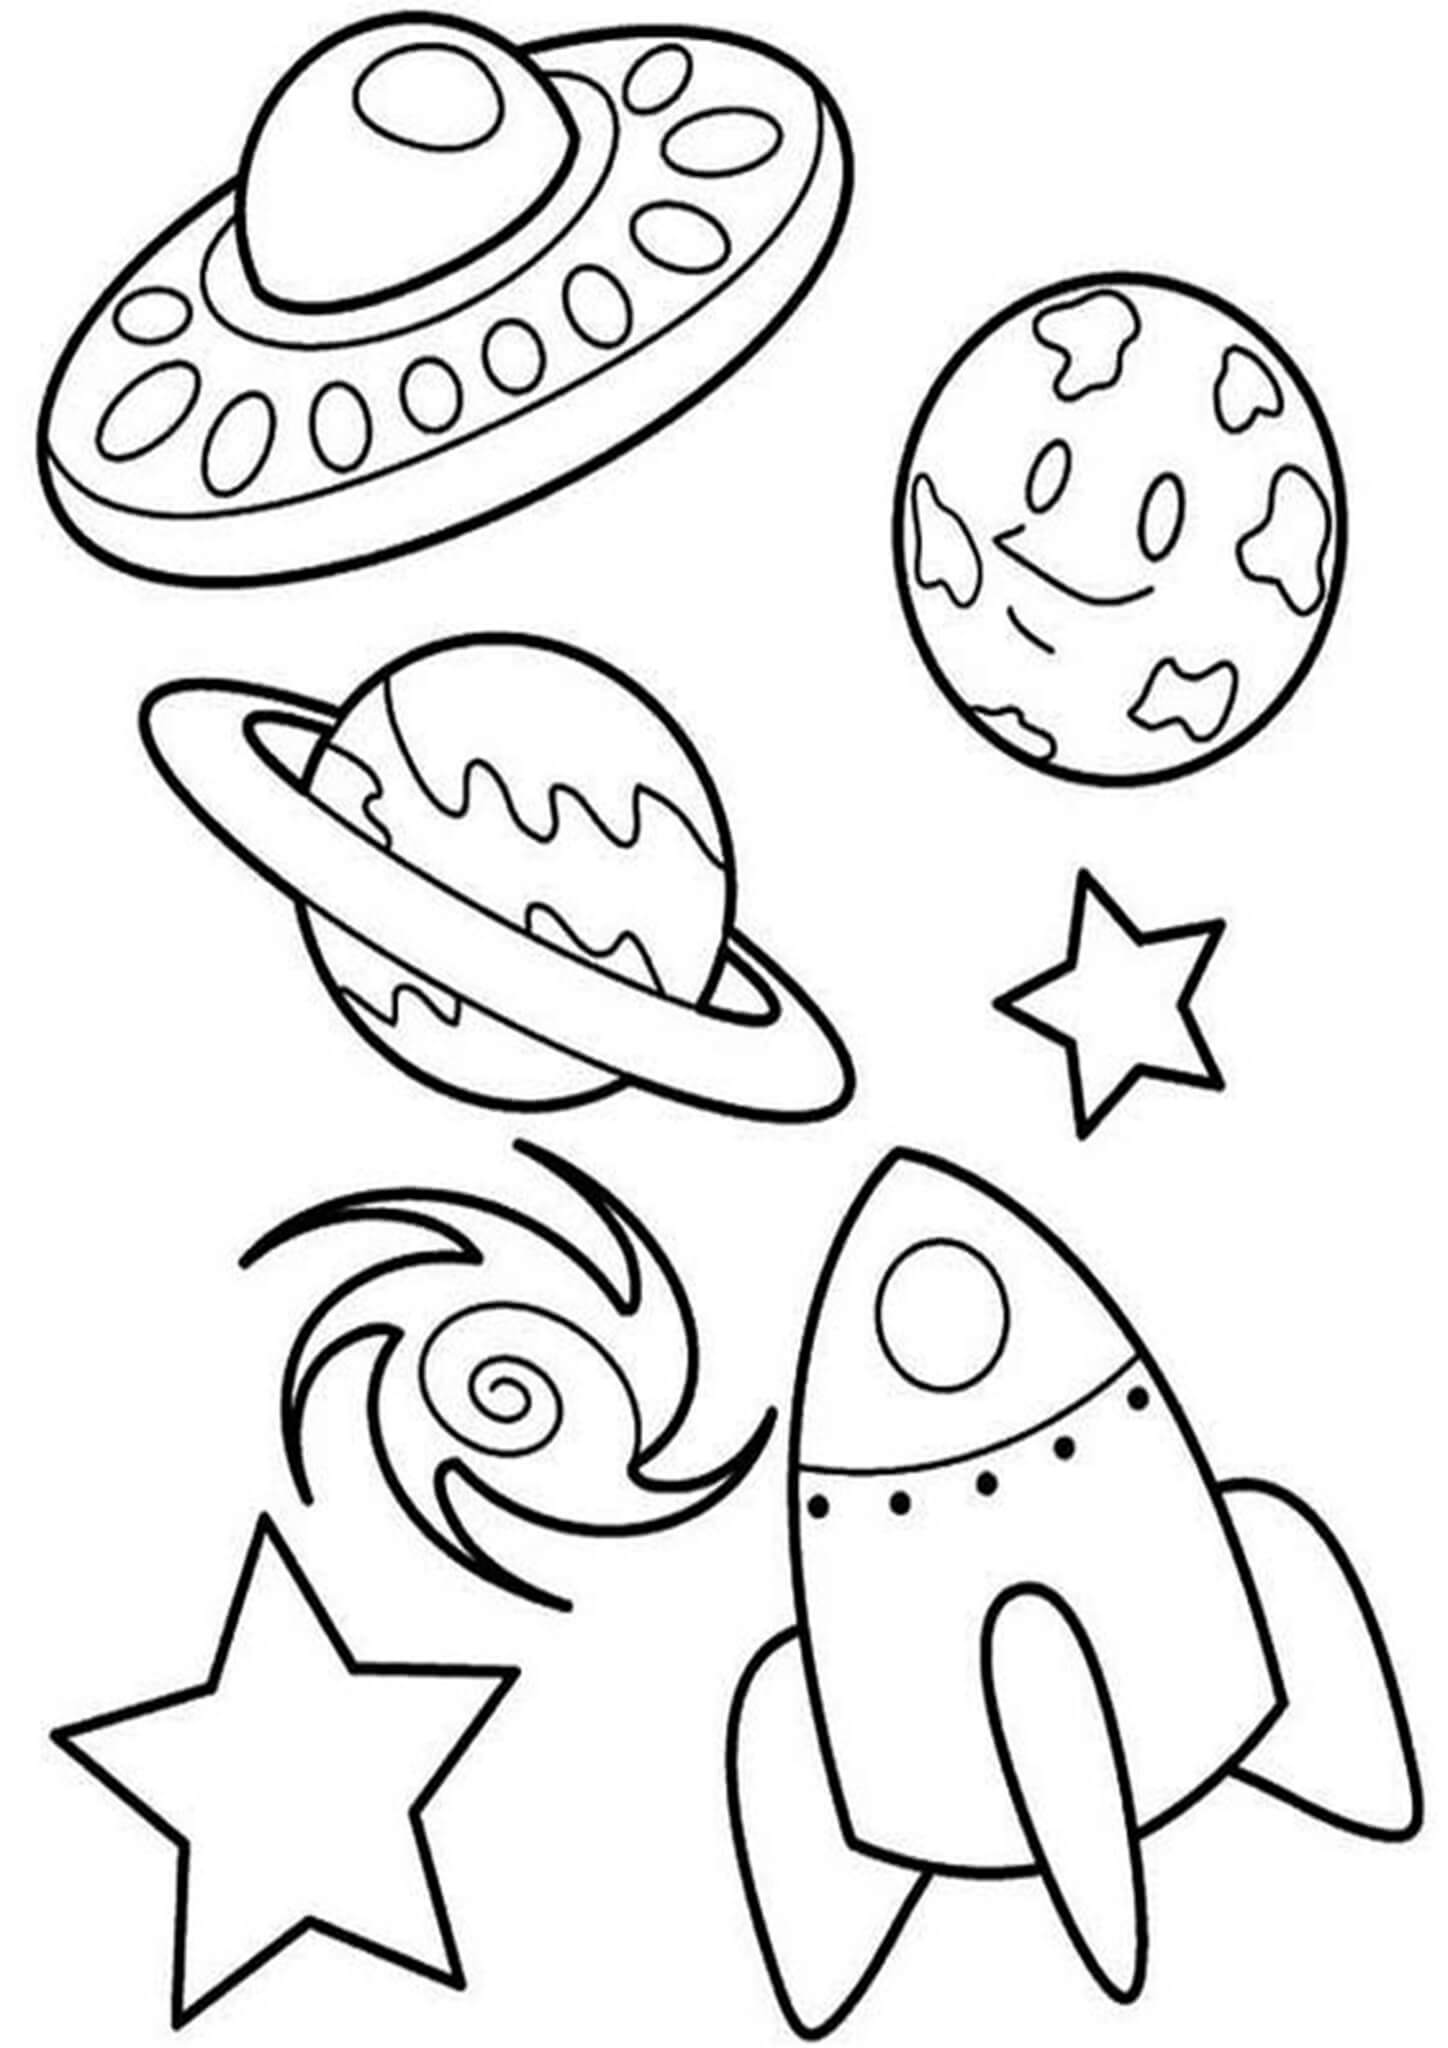 space-coloring-pages-for-kids-space-coloring-pages